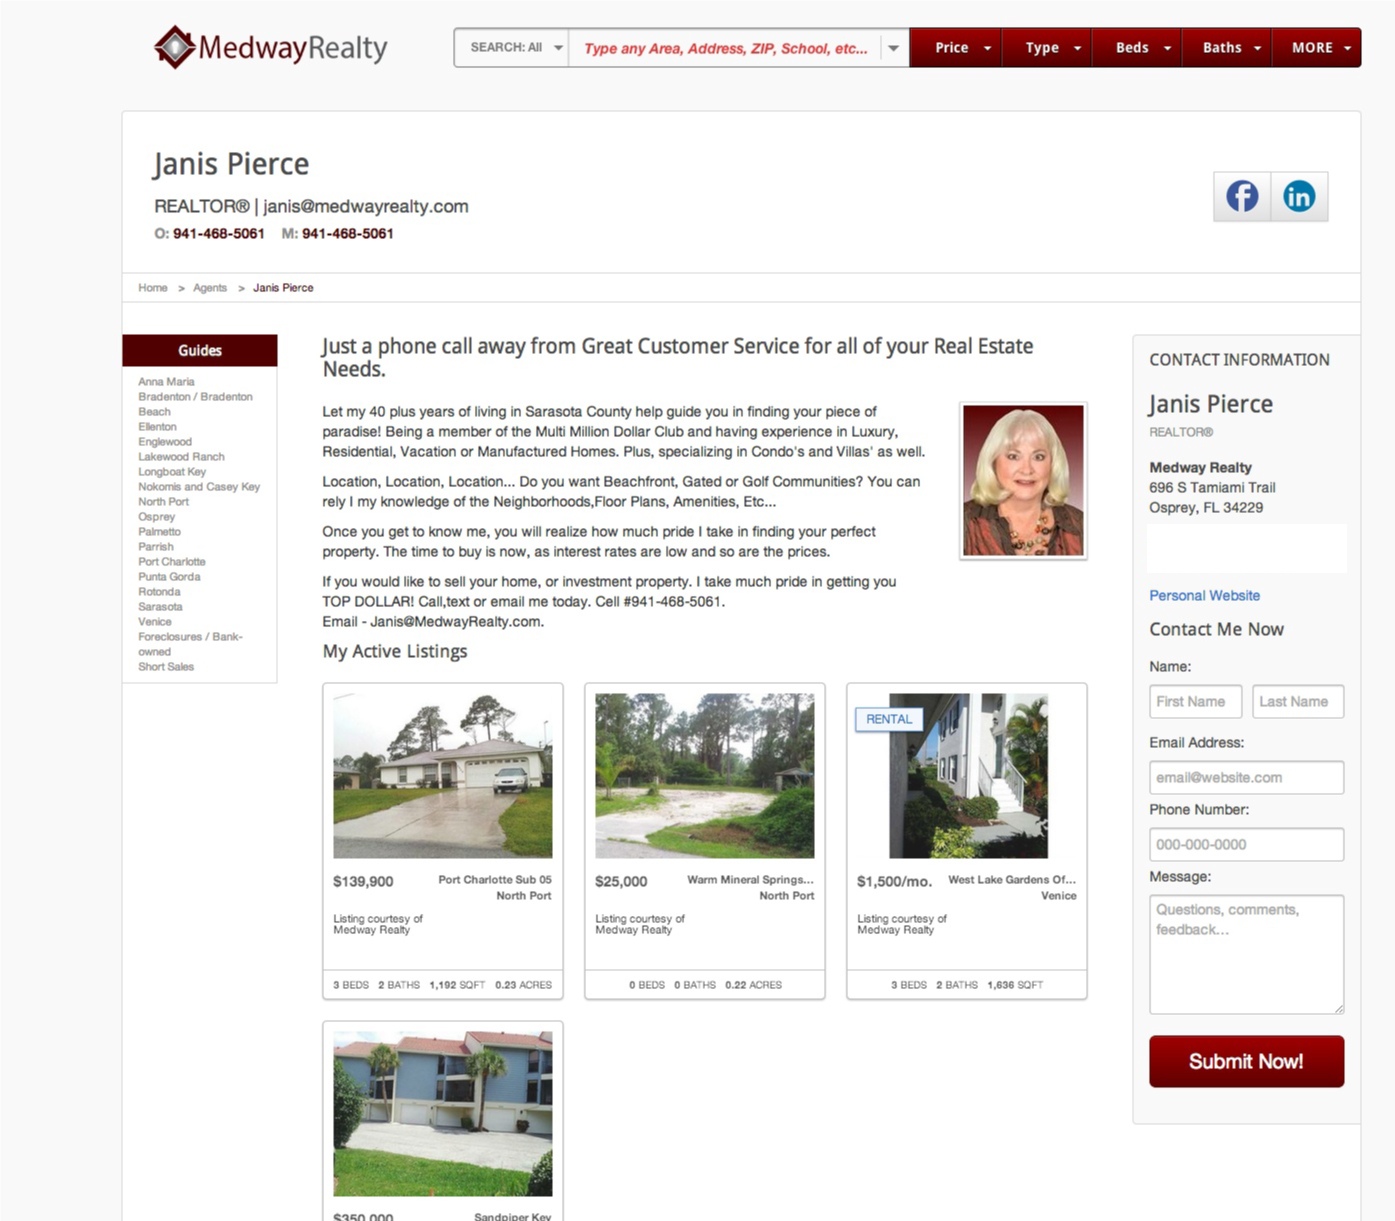 Medway Realty Latest Technology